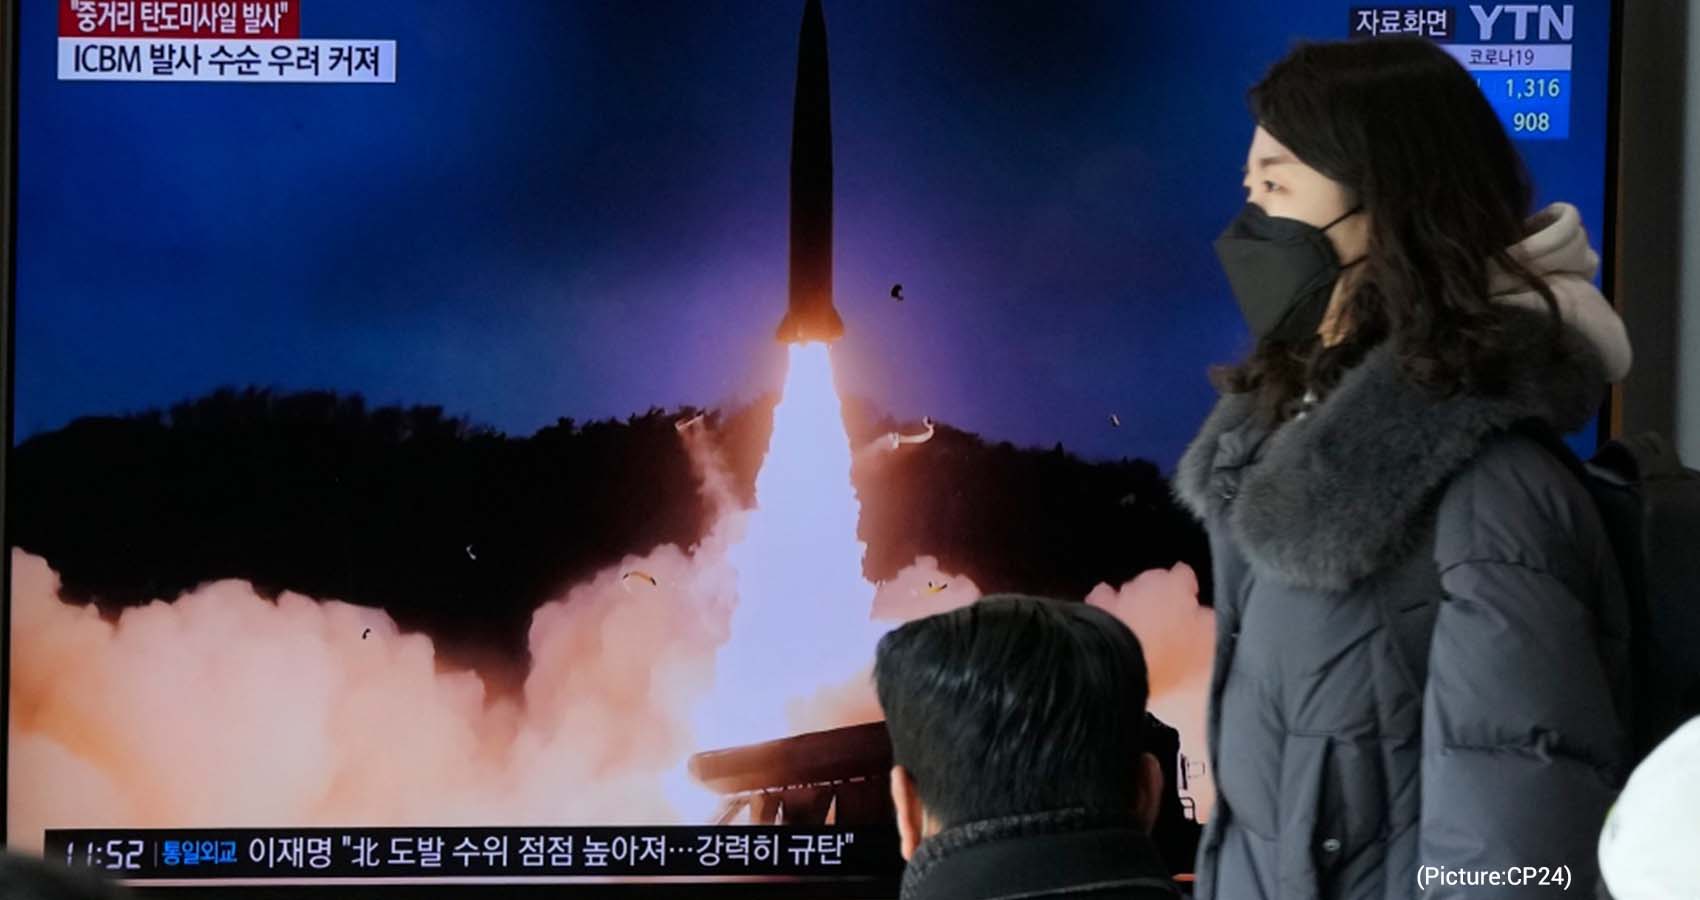 North Korea Confirms Of Testing Missile Capable Of Striking Guam, US